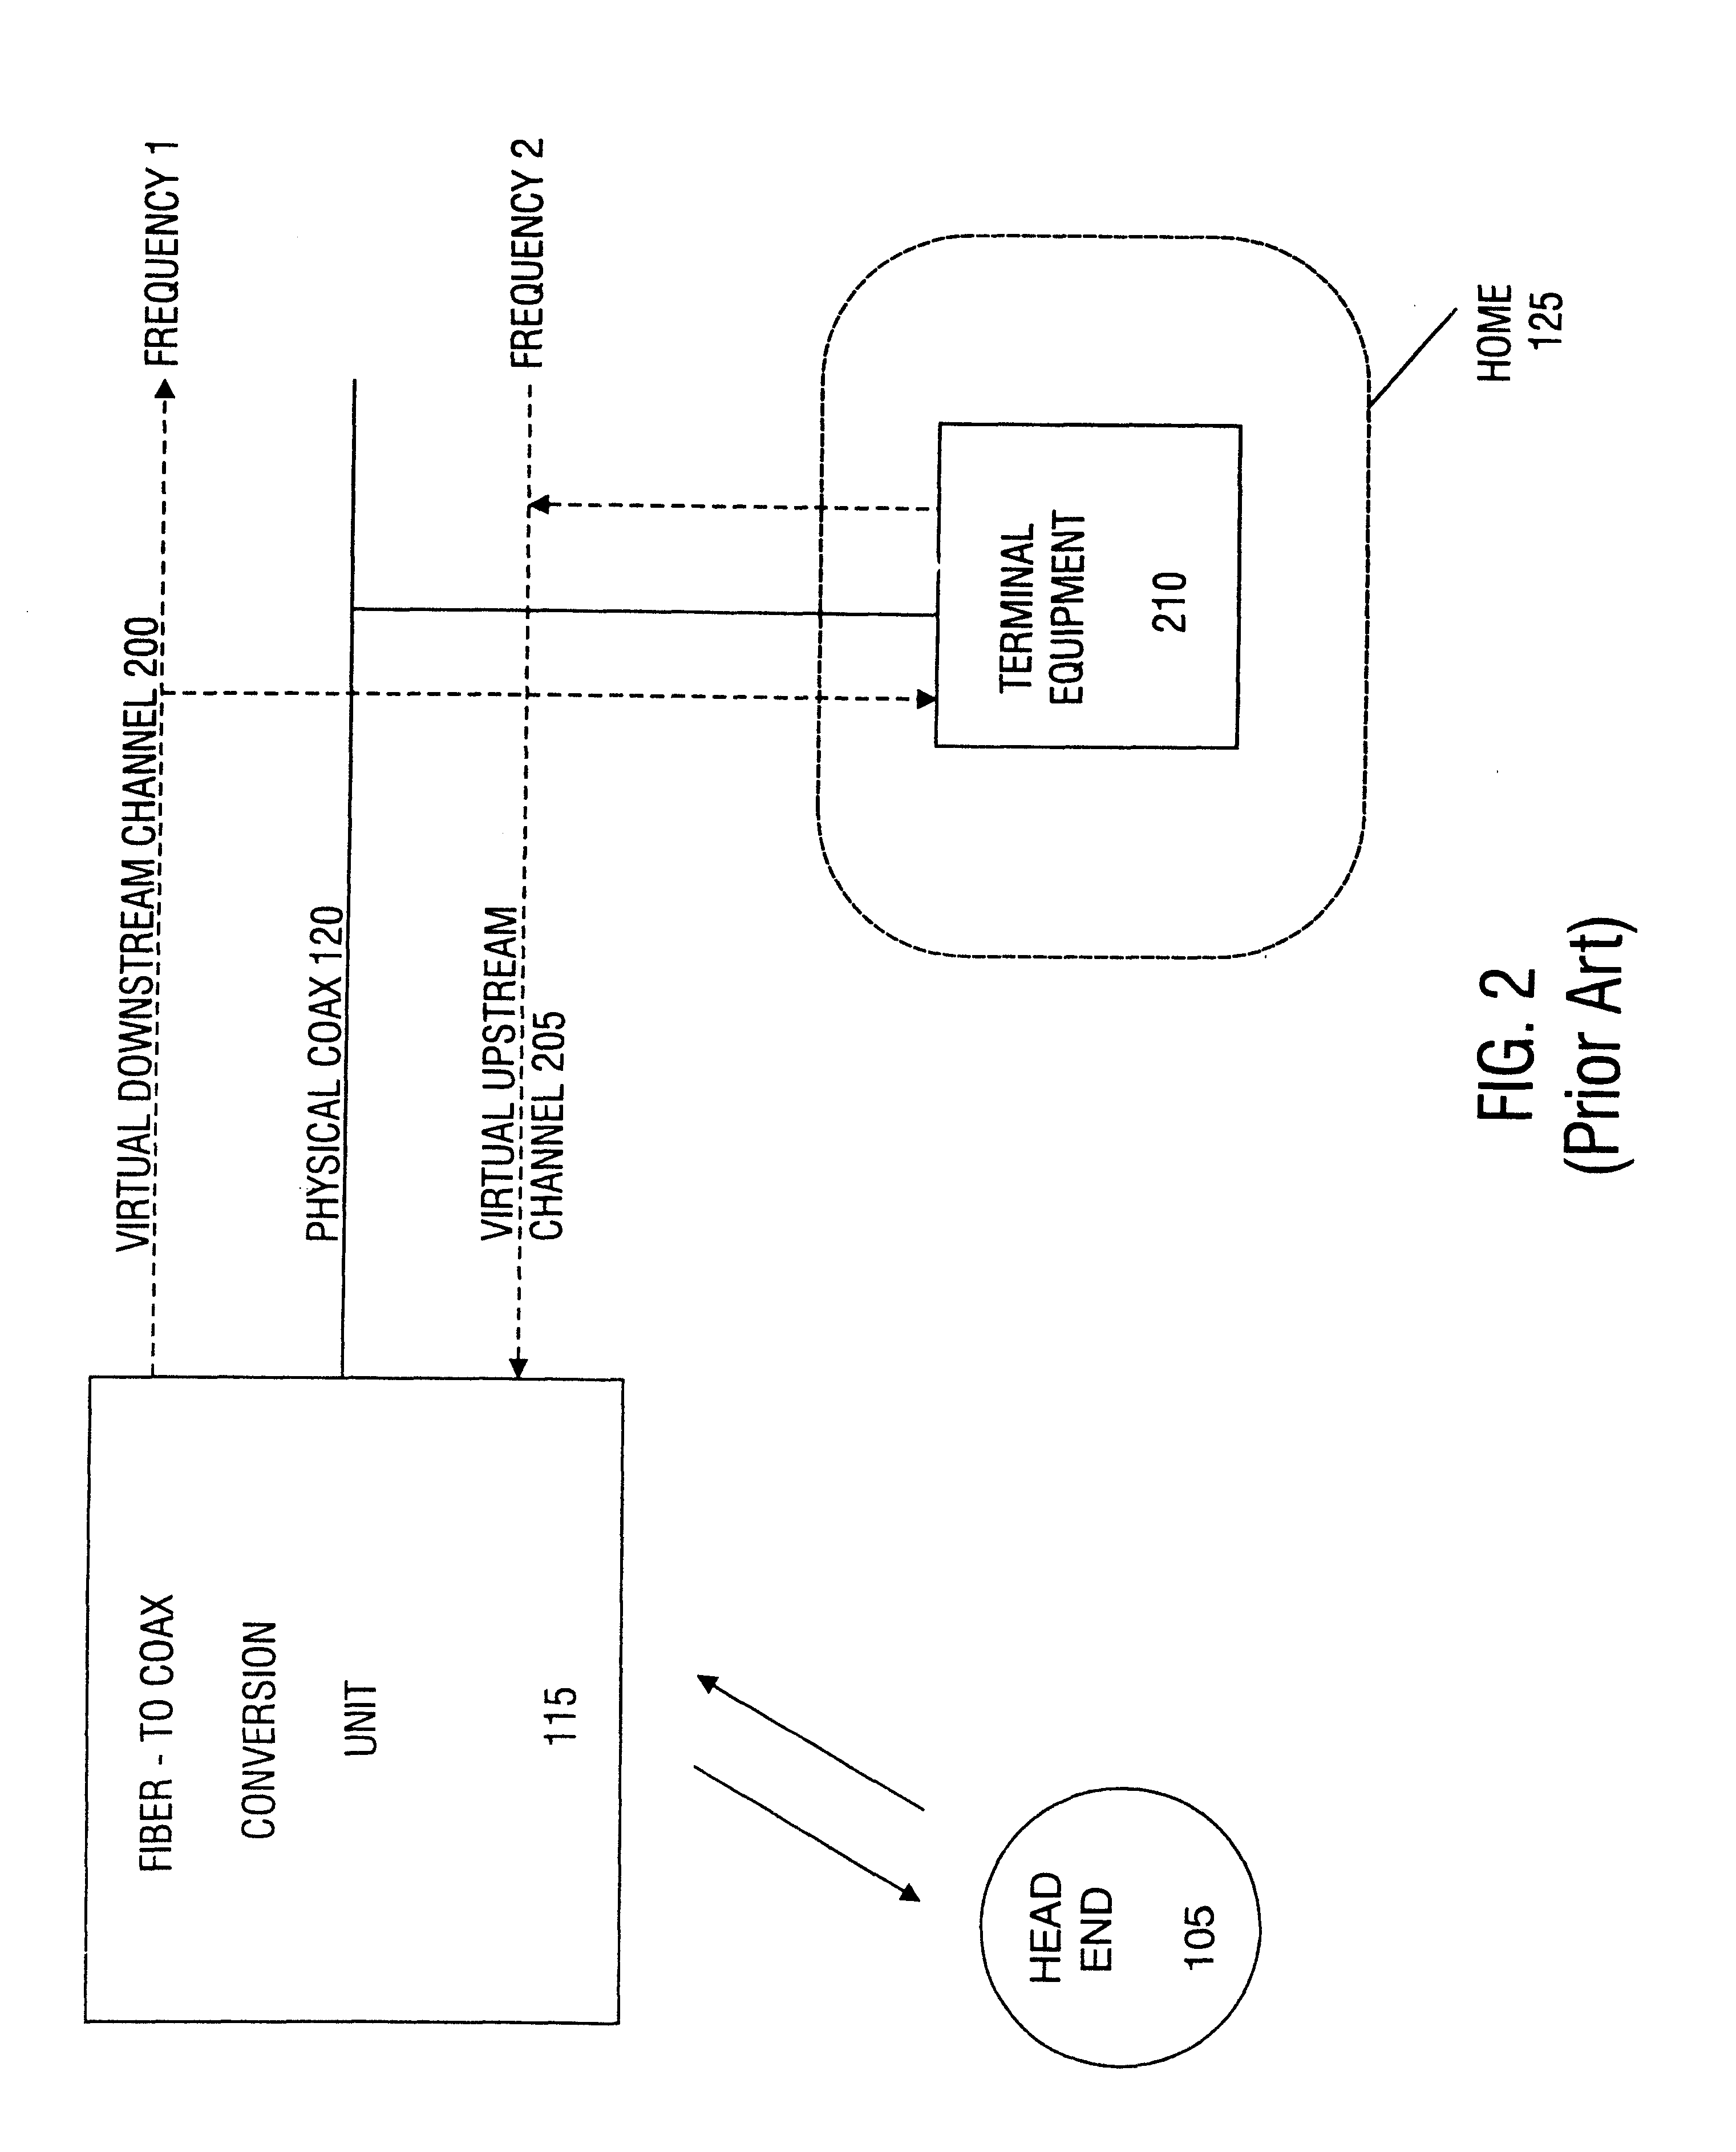 Method for providing integrated packet services over a shared-media network